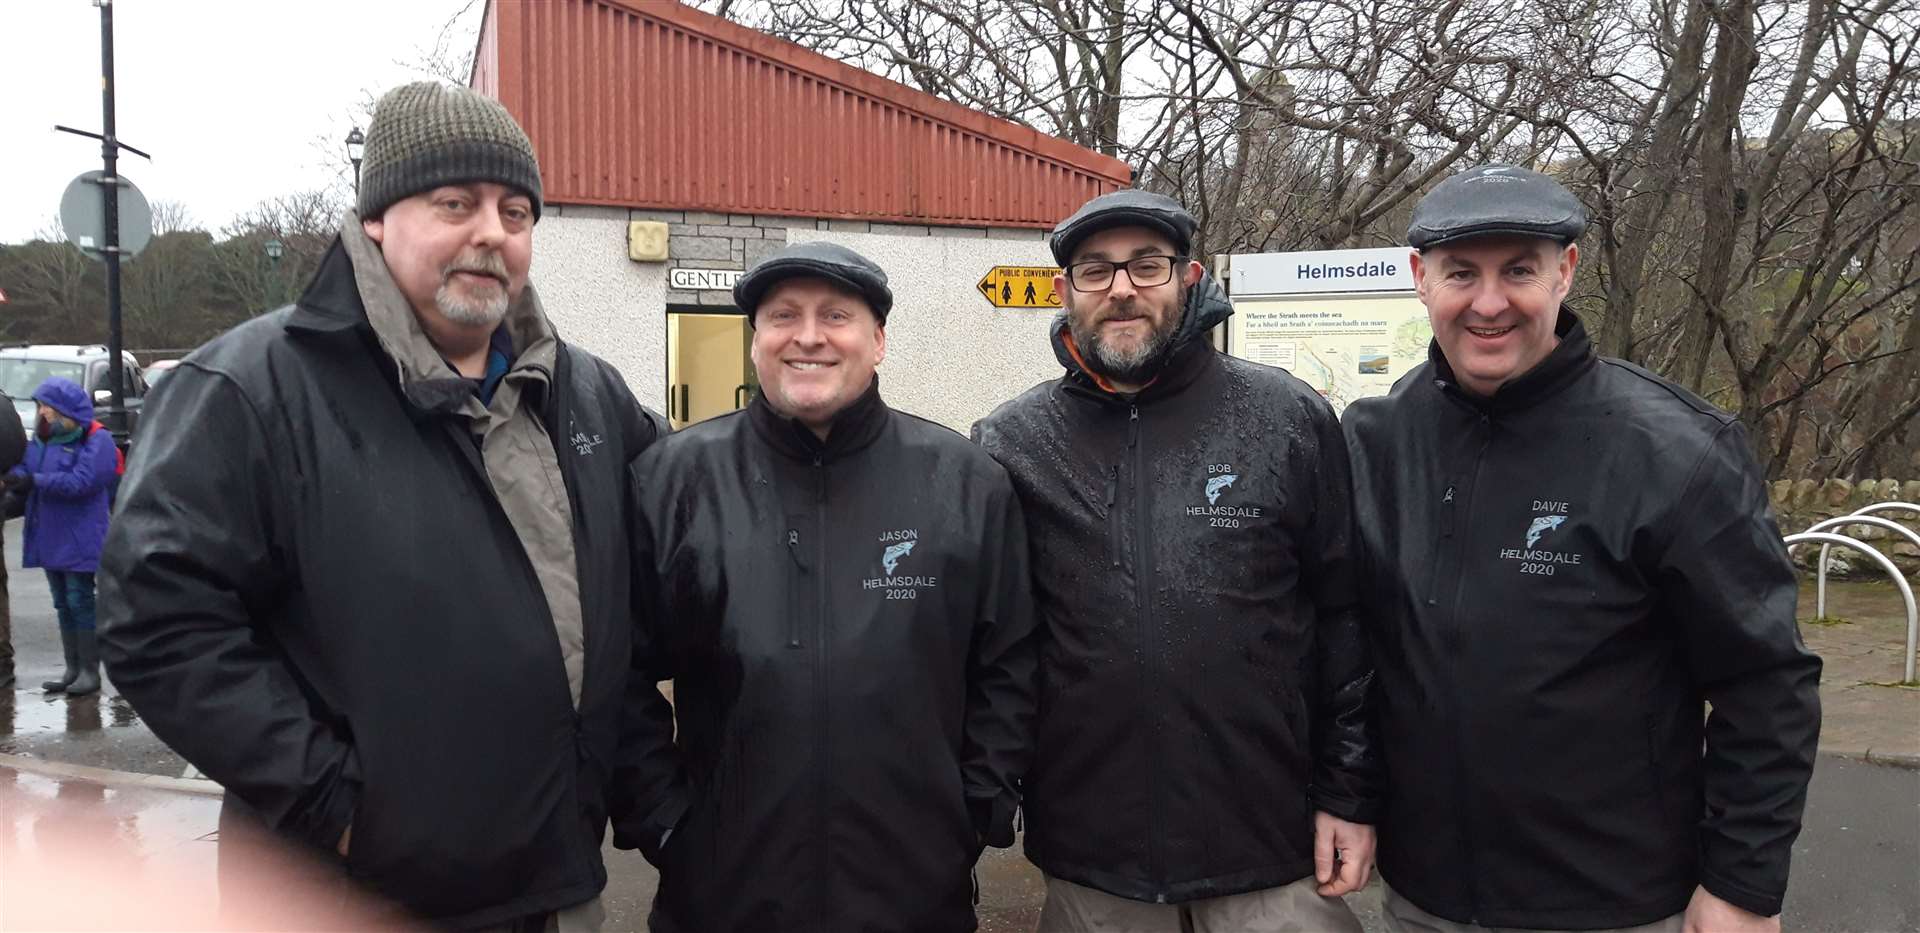 These four friends from the Glasgow area have been attending the opening ceremony of the River Helmsale for years. They are wearing matching jackets with the words River Helmsdale 2020 on them, and are looking forward to a week's fishing.